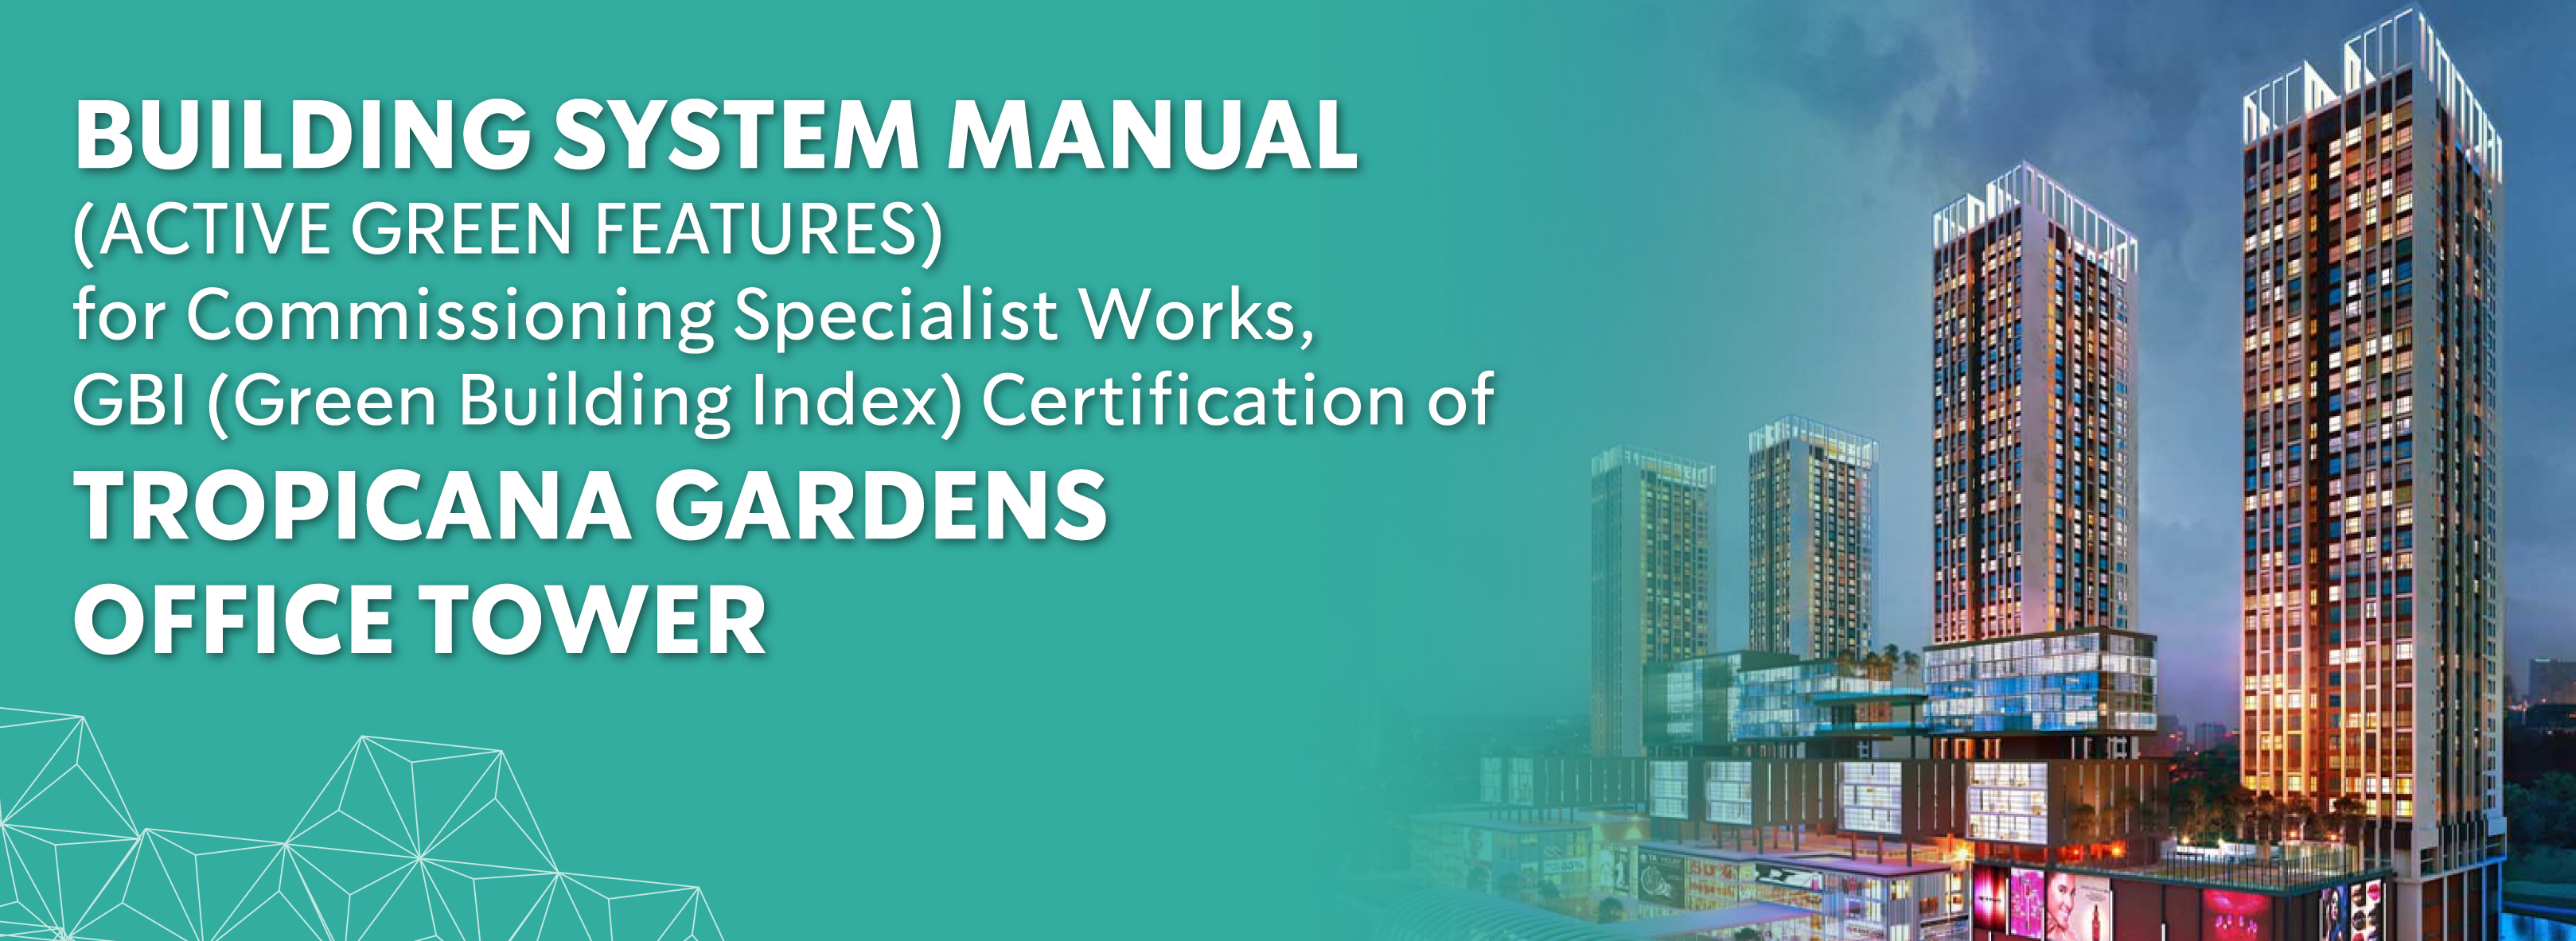 Tropicana Gardens Mall Building System Manual (Active Green Features) for Commisioning Specialist Works, GBI (Green Building Index) Certification of Tropicana Gardens Office Tower